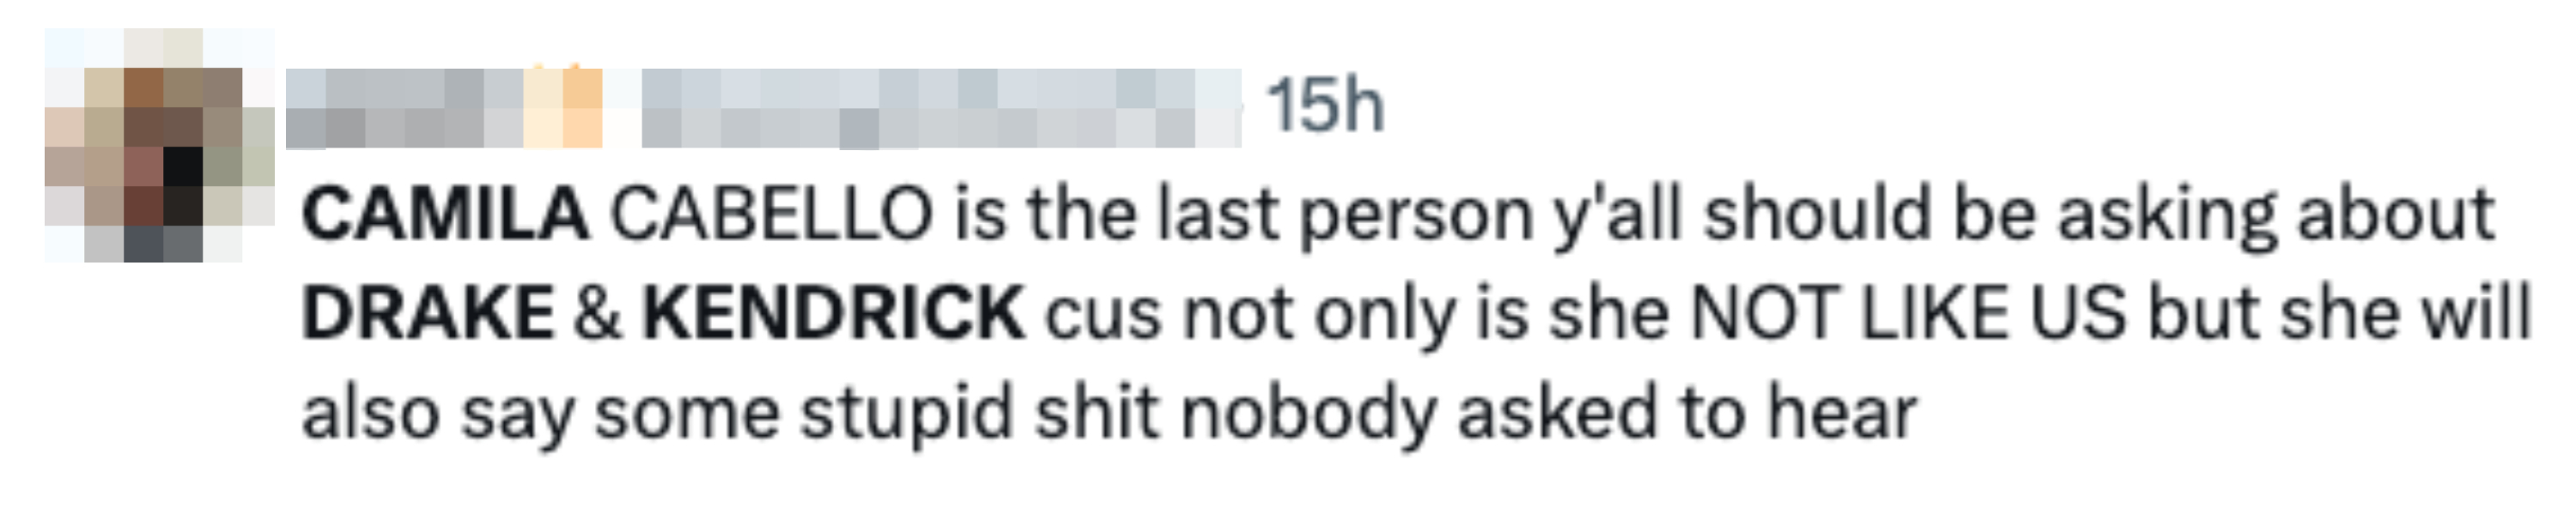 A tweet from user &quot;presli&quot; criticizing Camila Cabello, stating that people should focus on Drake and Kendrick instead, and that Cabello is &quot;not like us&quot; and makes unnecessary comments